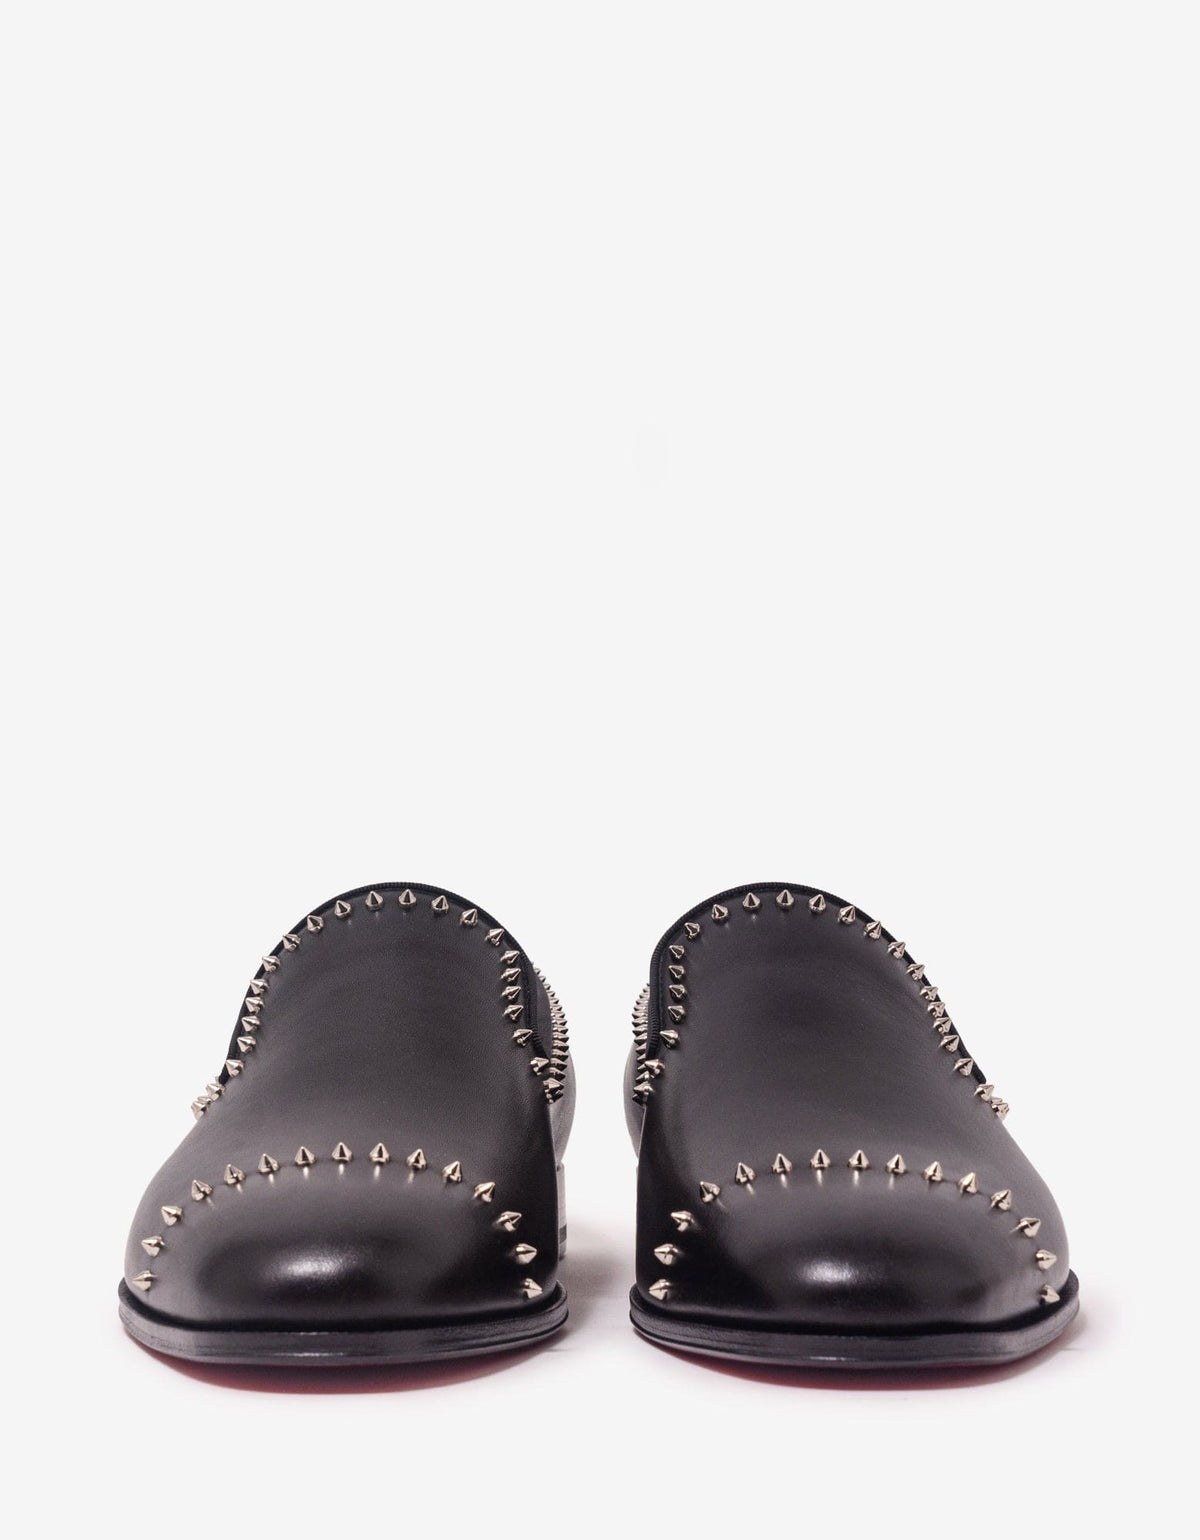 Dandy Cloo Black Loafers Louboutin our online store today! Stop by today